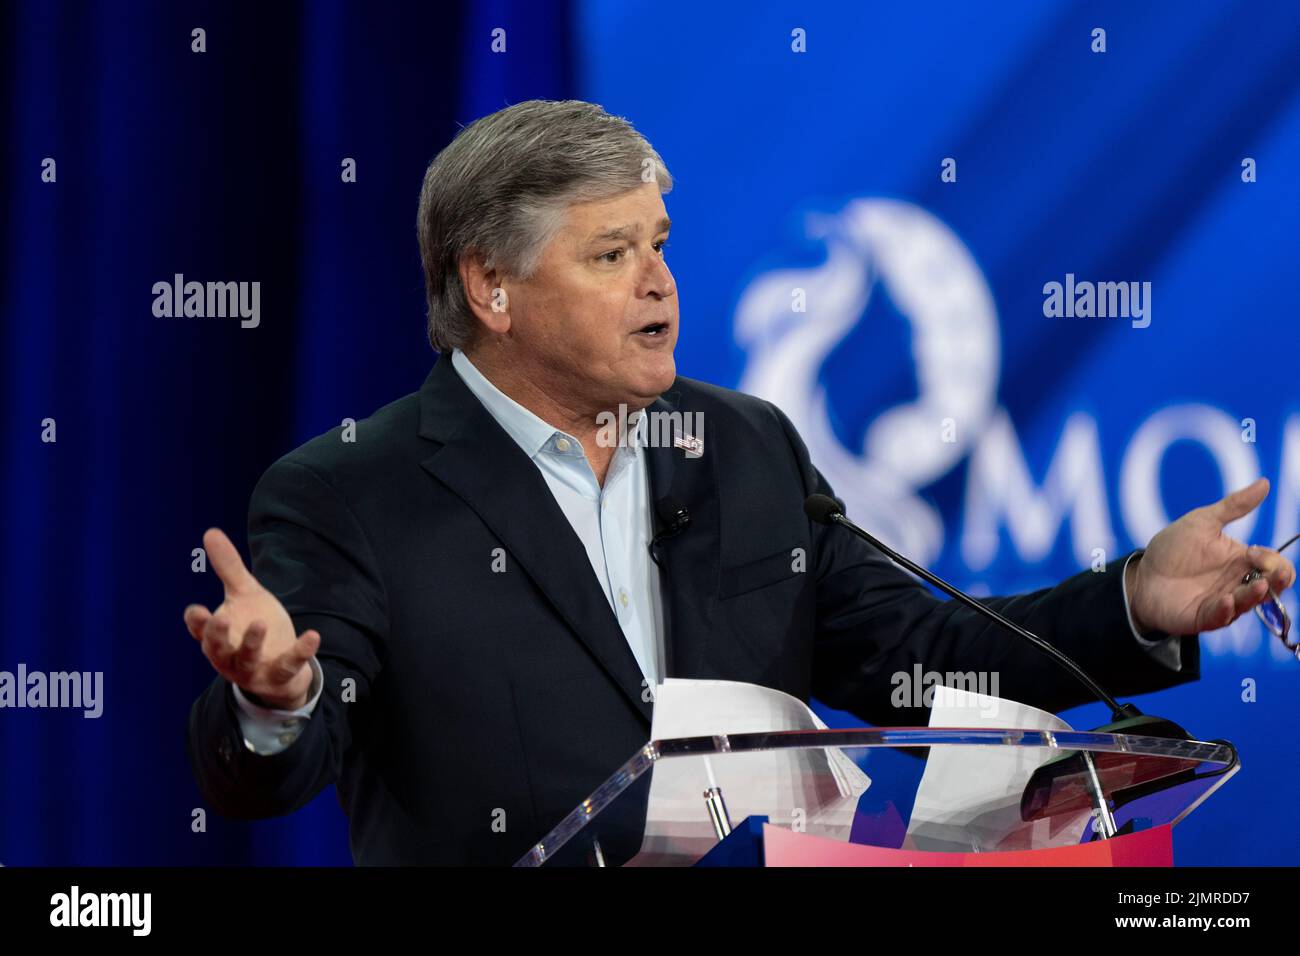 Dallas, TX - August 4, 2022: Sean Hannity speaks during CPAC Texas 2022 conference at Hilton Anatole Stock Photo